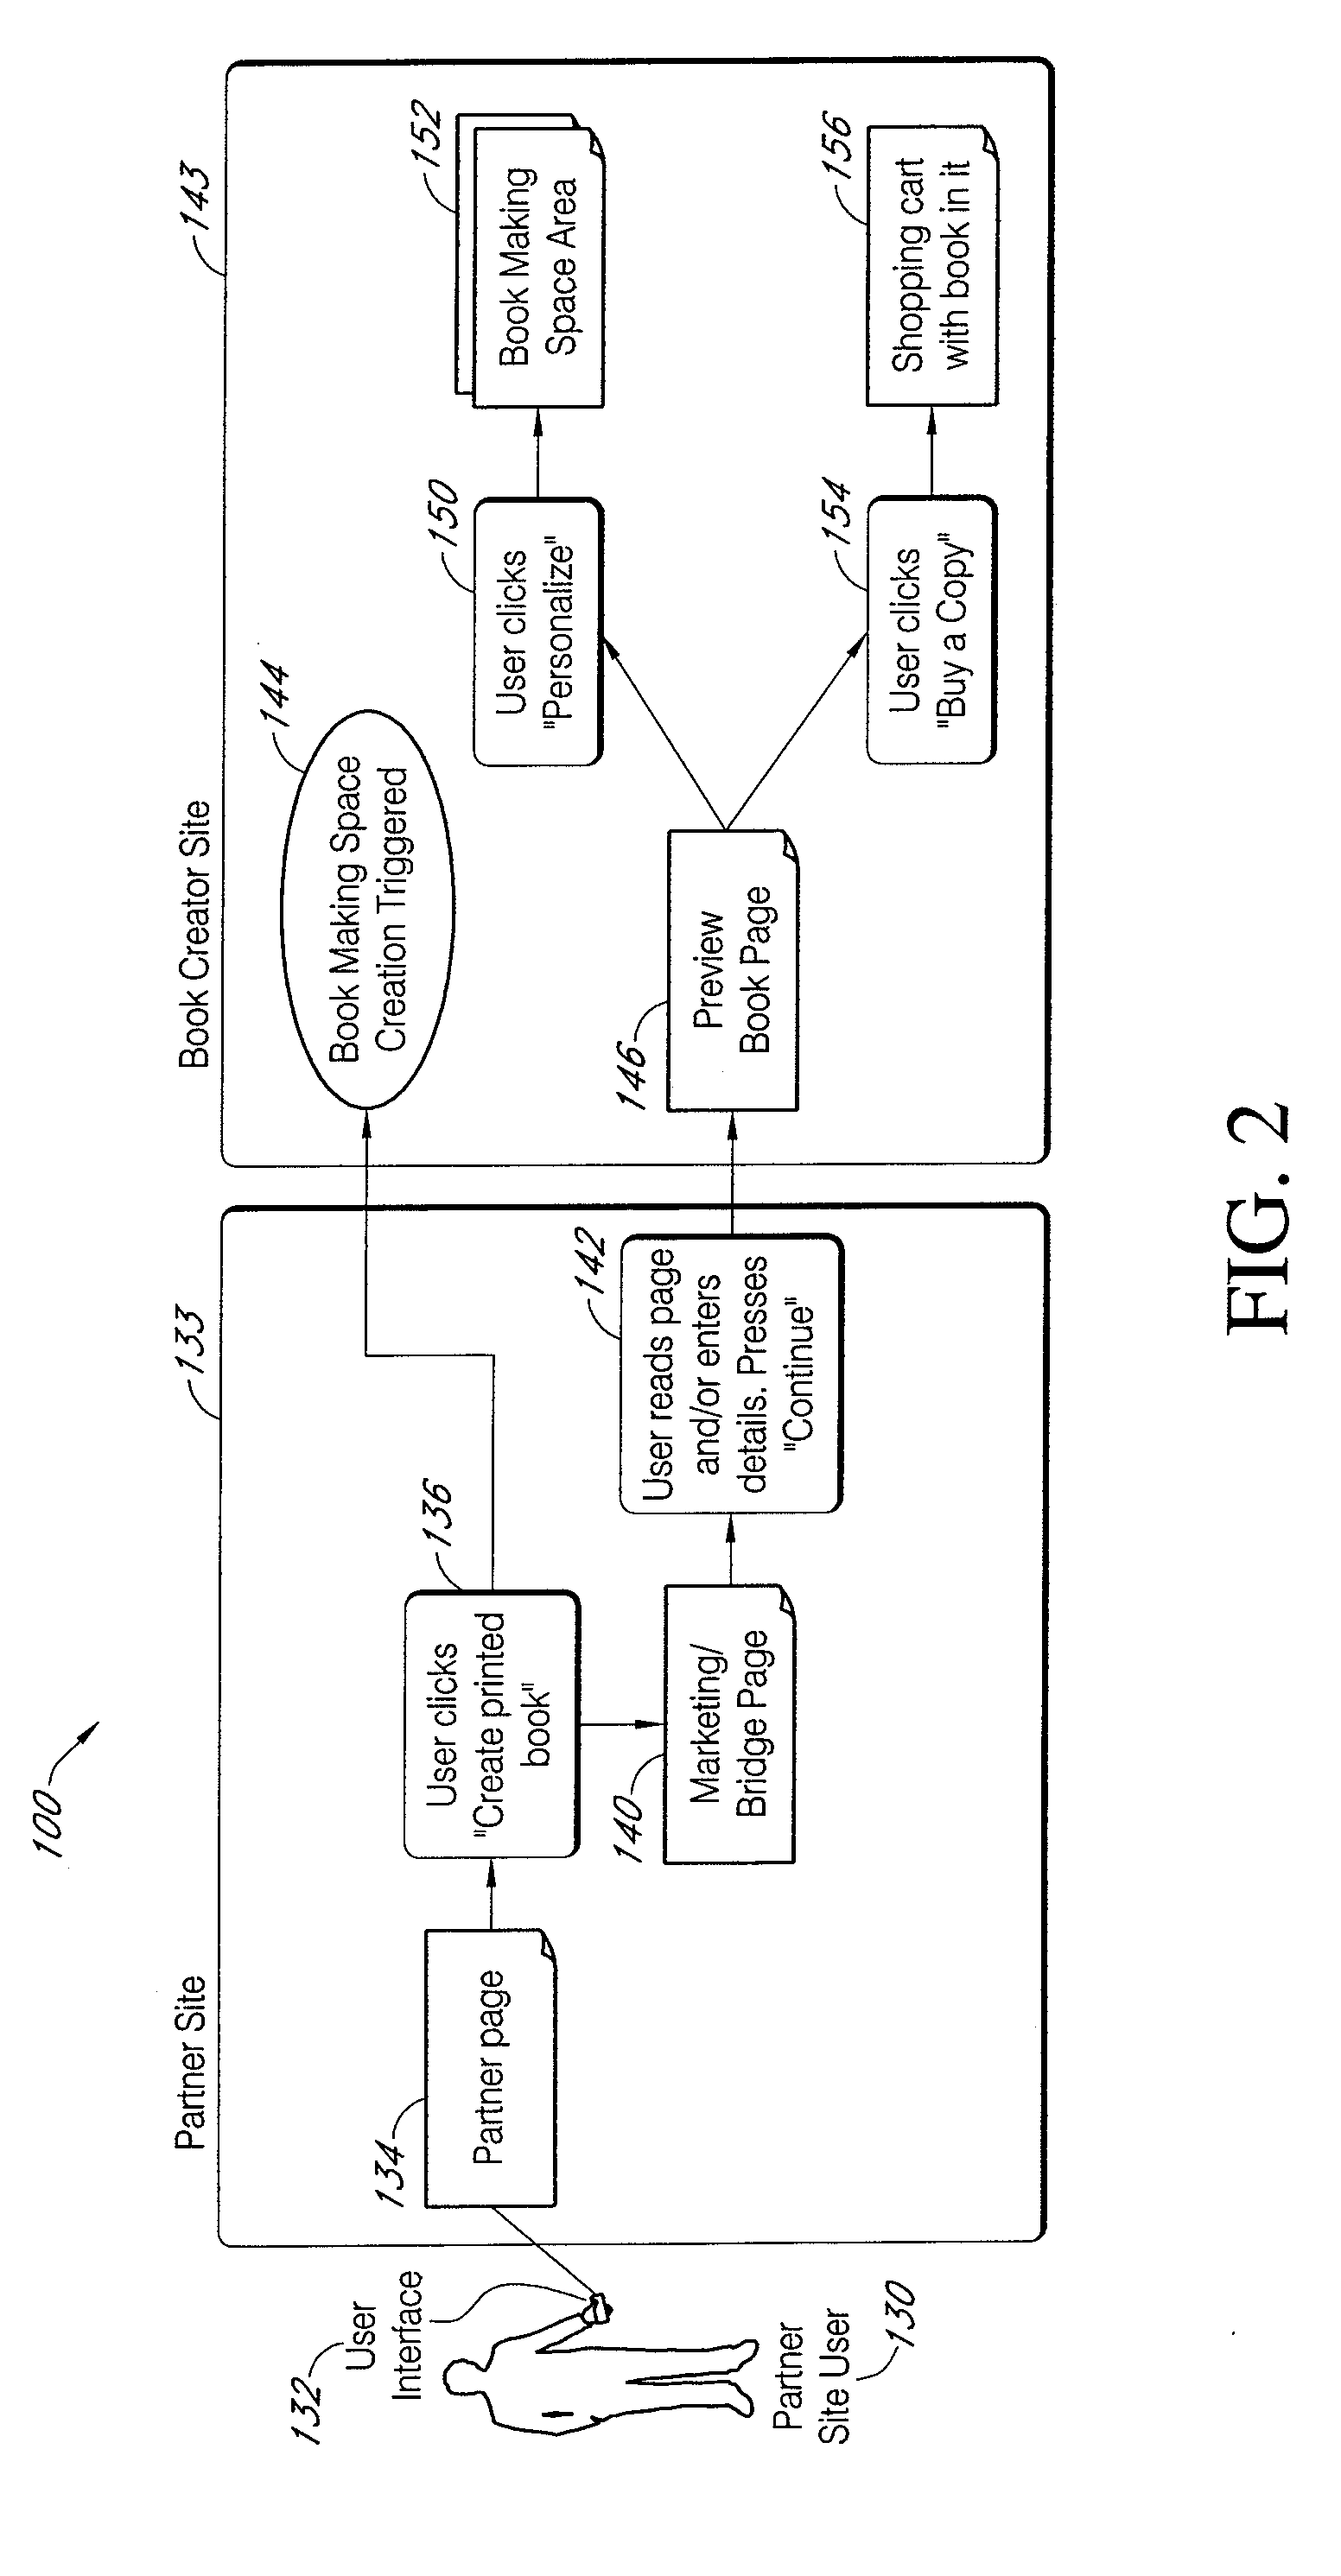 Systems and methods of data integration for creating custom books